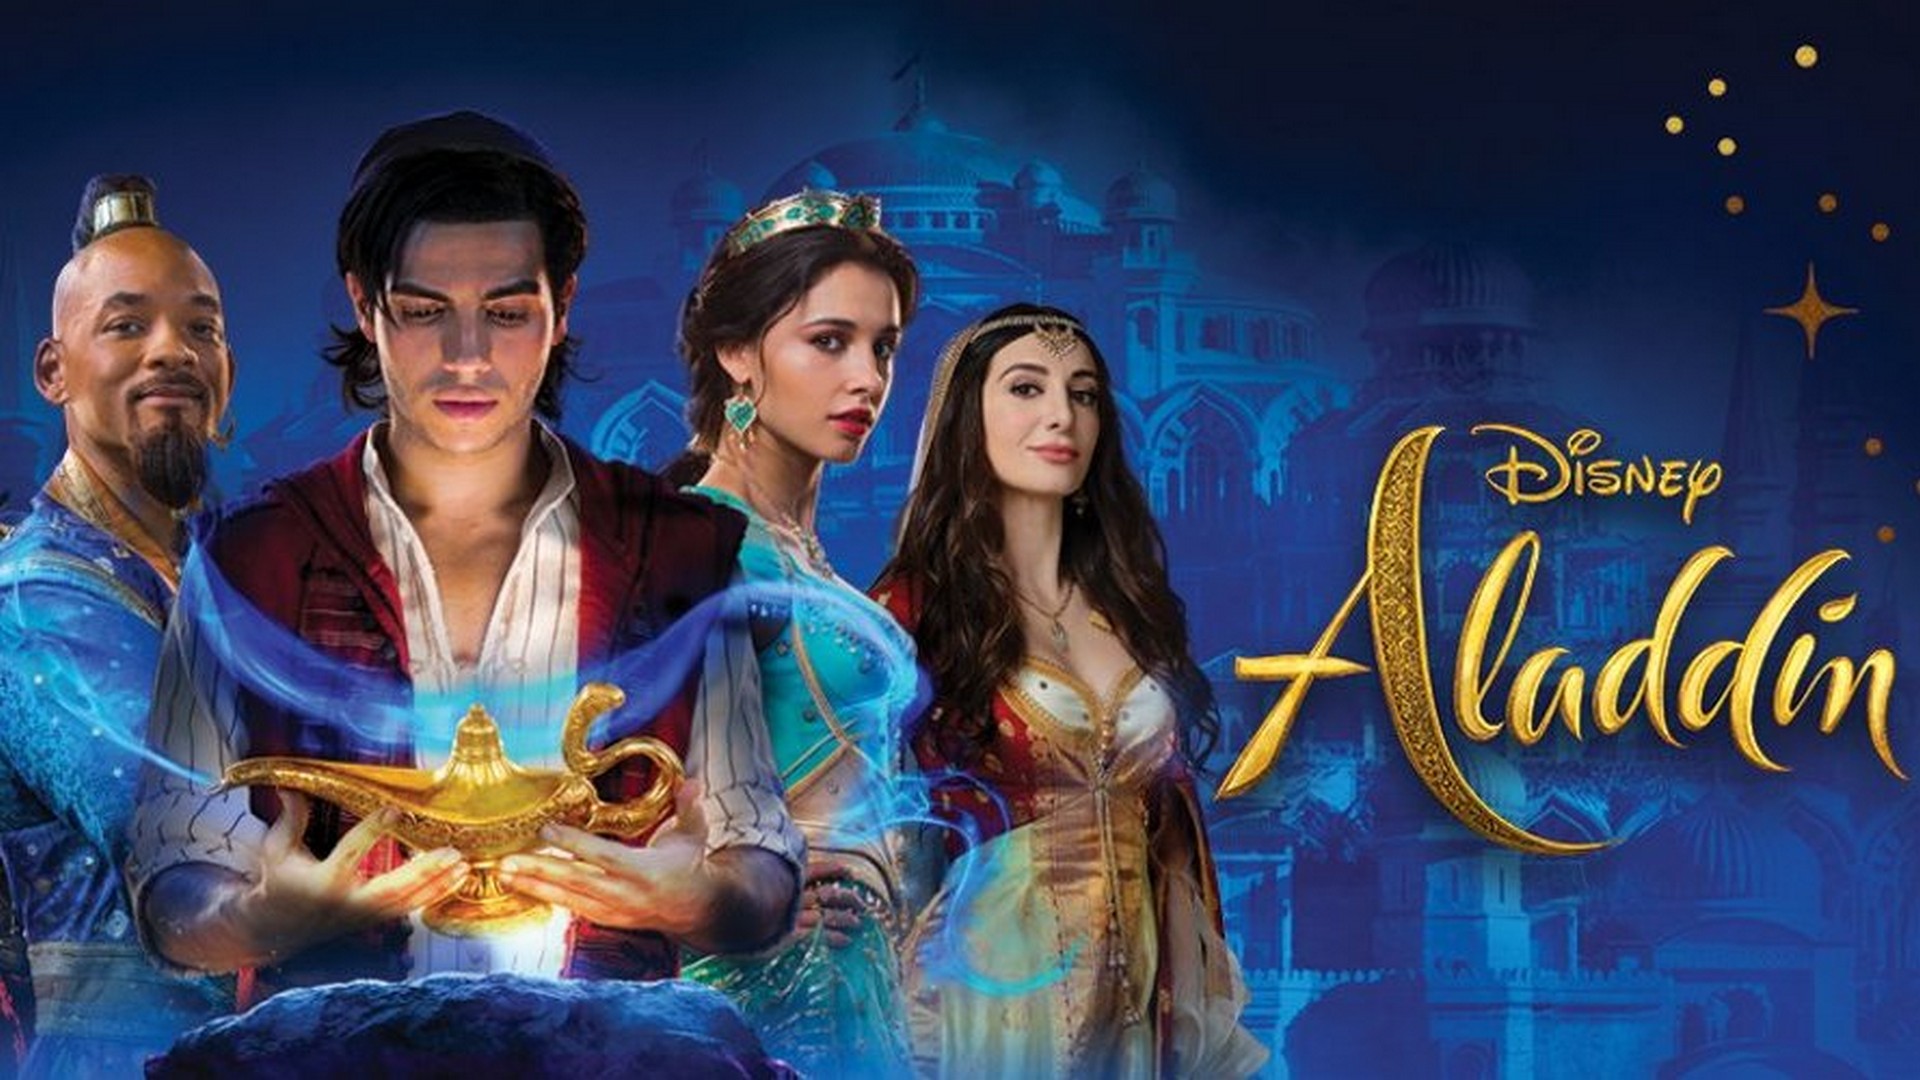 Aladdin 2019 Wallpaper HD with high-resolution 1920x1080 pixel. You can use this poster wallpaper for your Desktop Computers, Mac Screensavers, Windows Backgrounds, iPhone Wallpapers, Tablet or Android Lock screen and another Mobile device